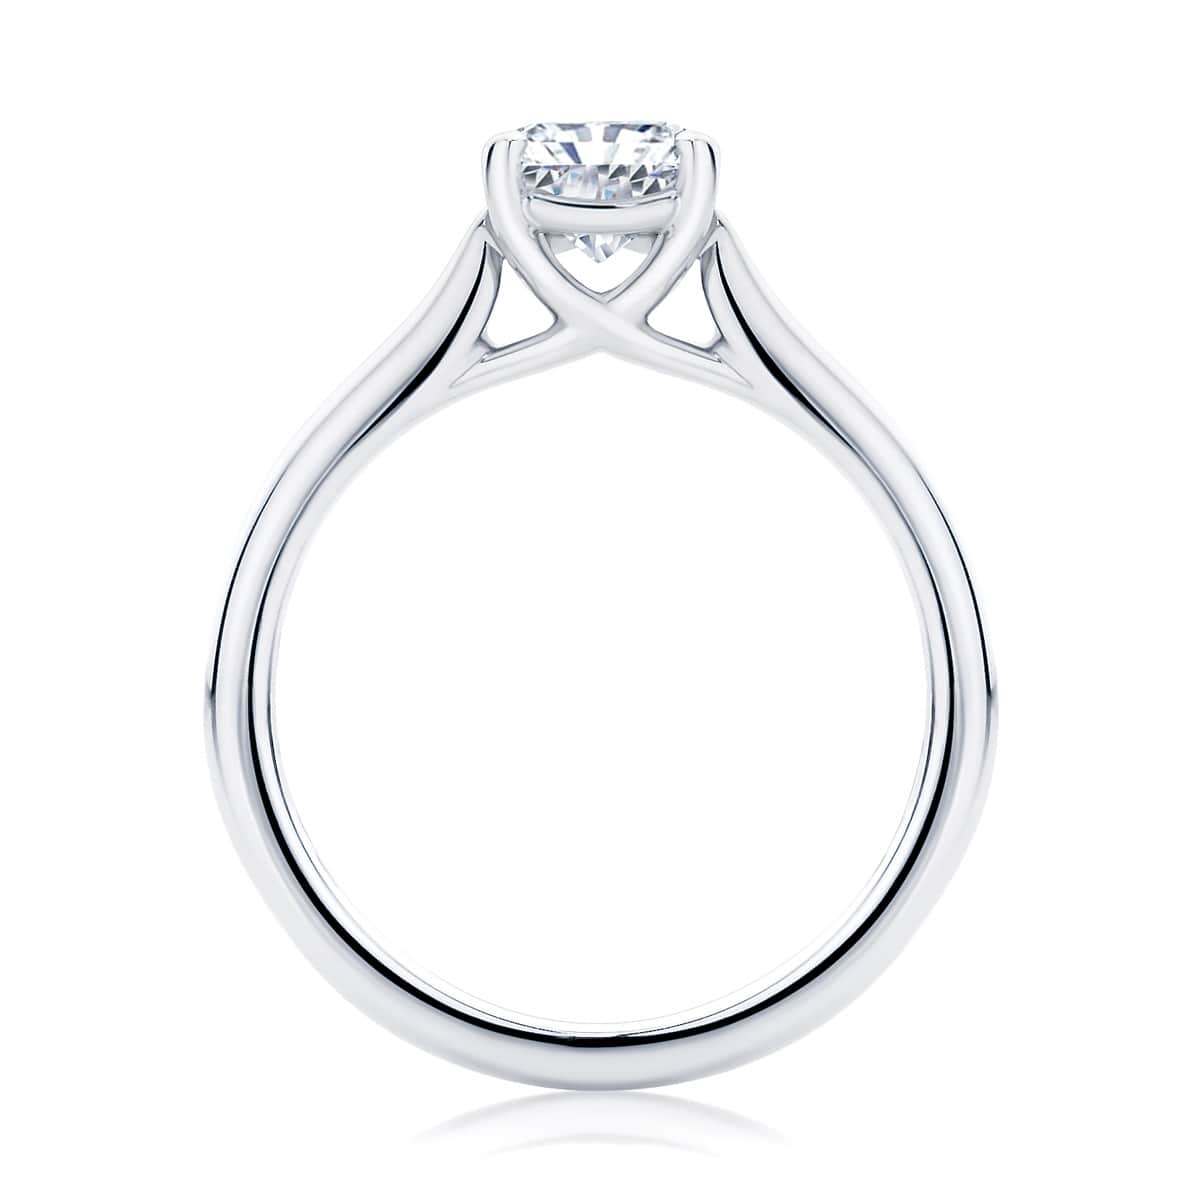 Radiant Diamond with Side Stones Ring in White Gold | Accented Ballerina (Radiant Cut)